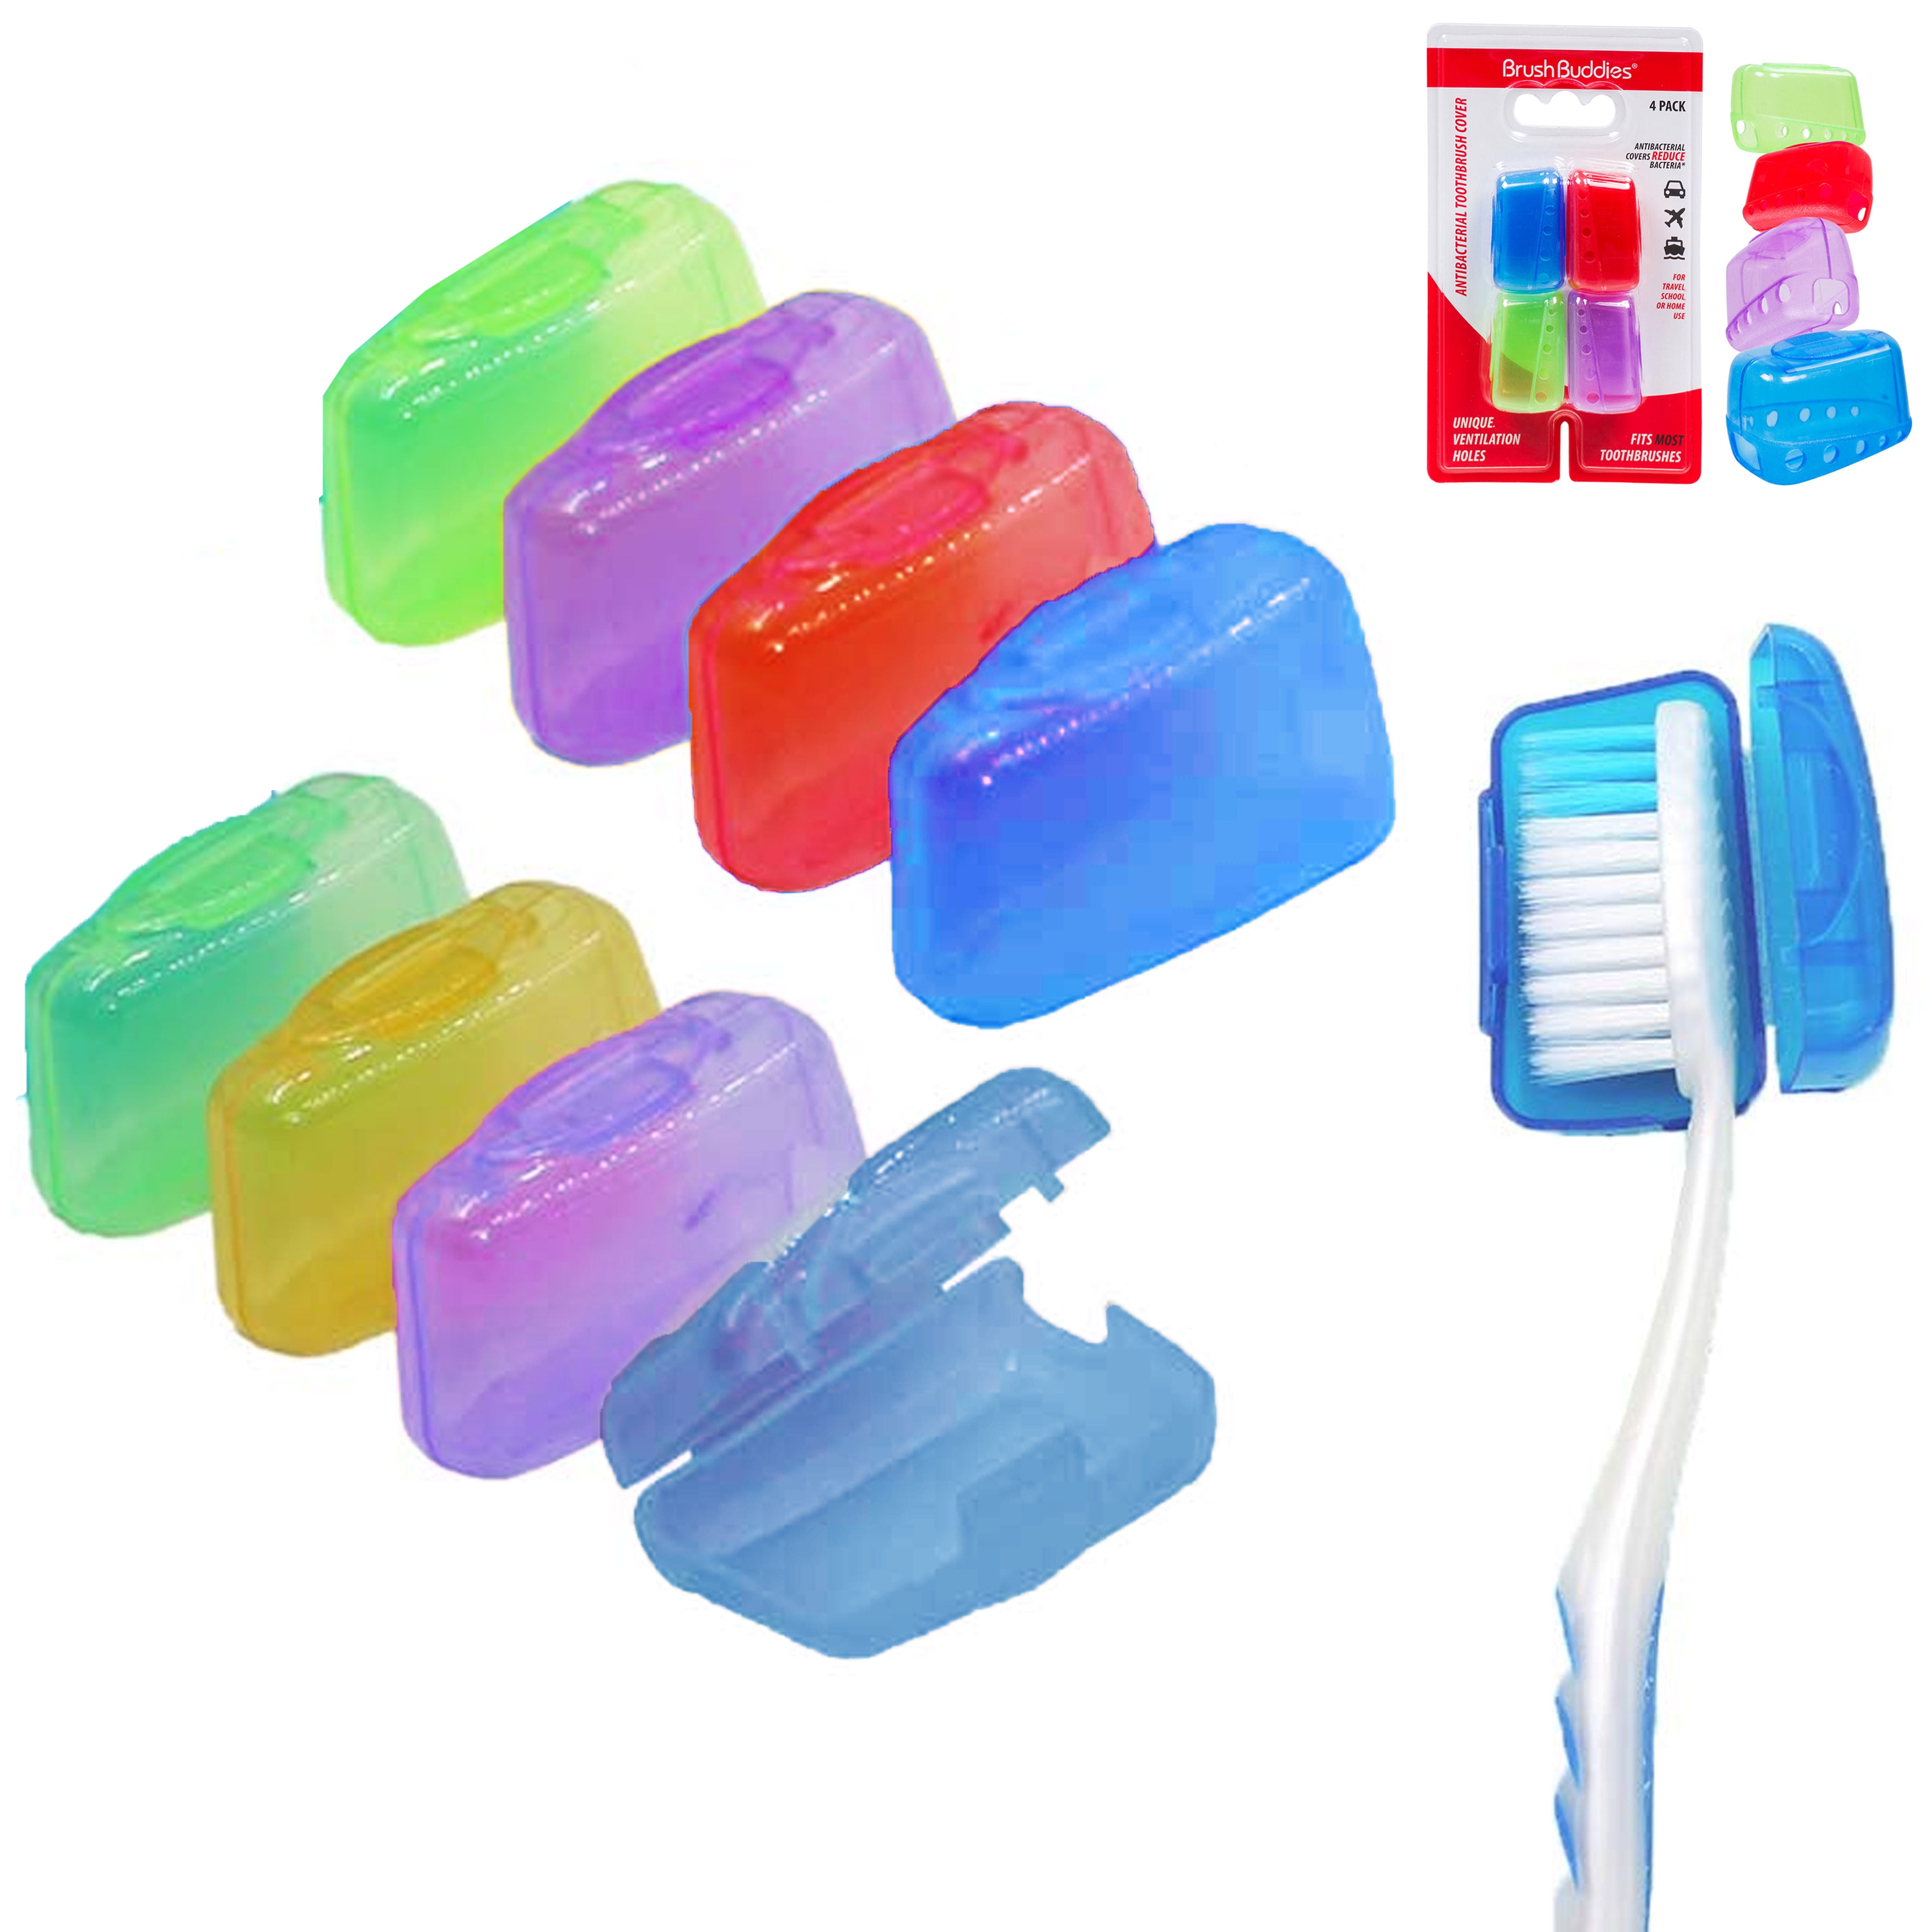 10PC Toothbrush Head Cover Holder Travel Camping Case Protect Brush Cap Case EAX